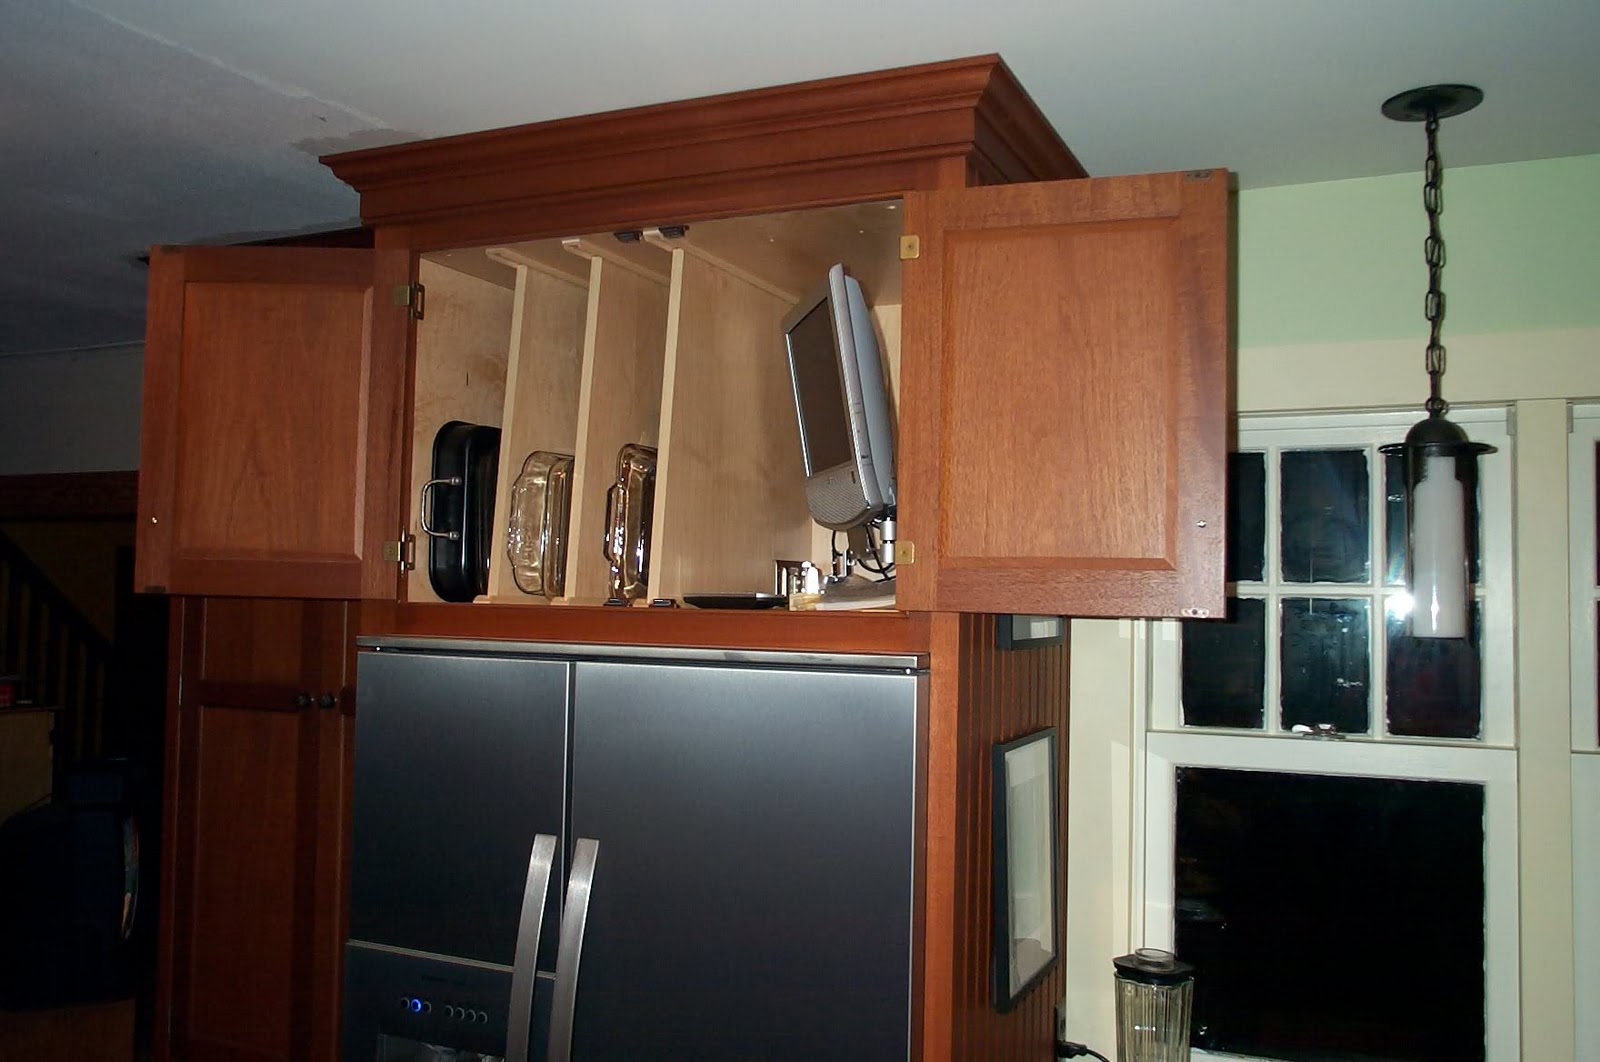 Cabinets Over The Refrigerator In My Hummel Opinion